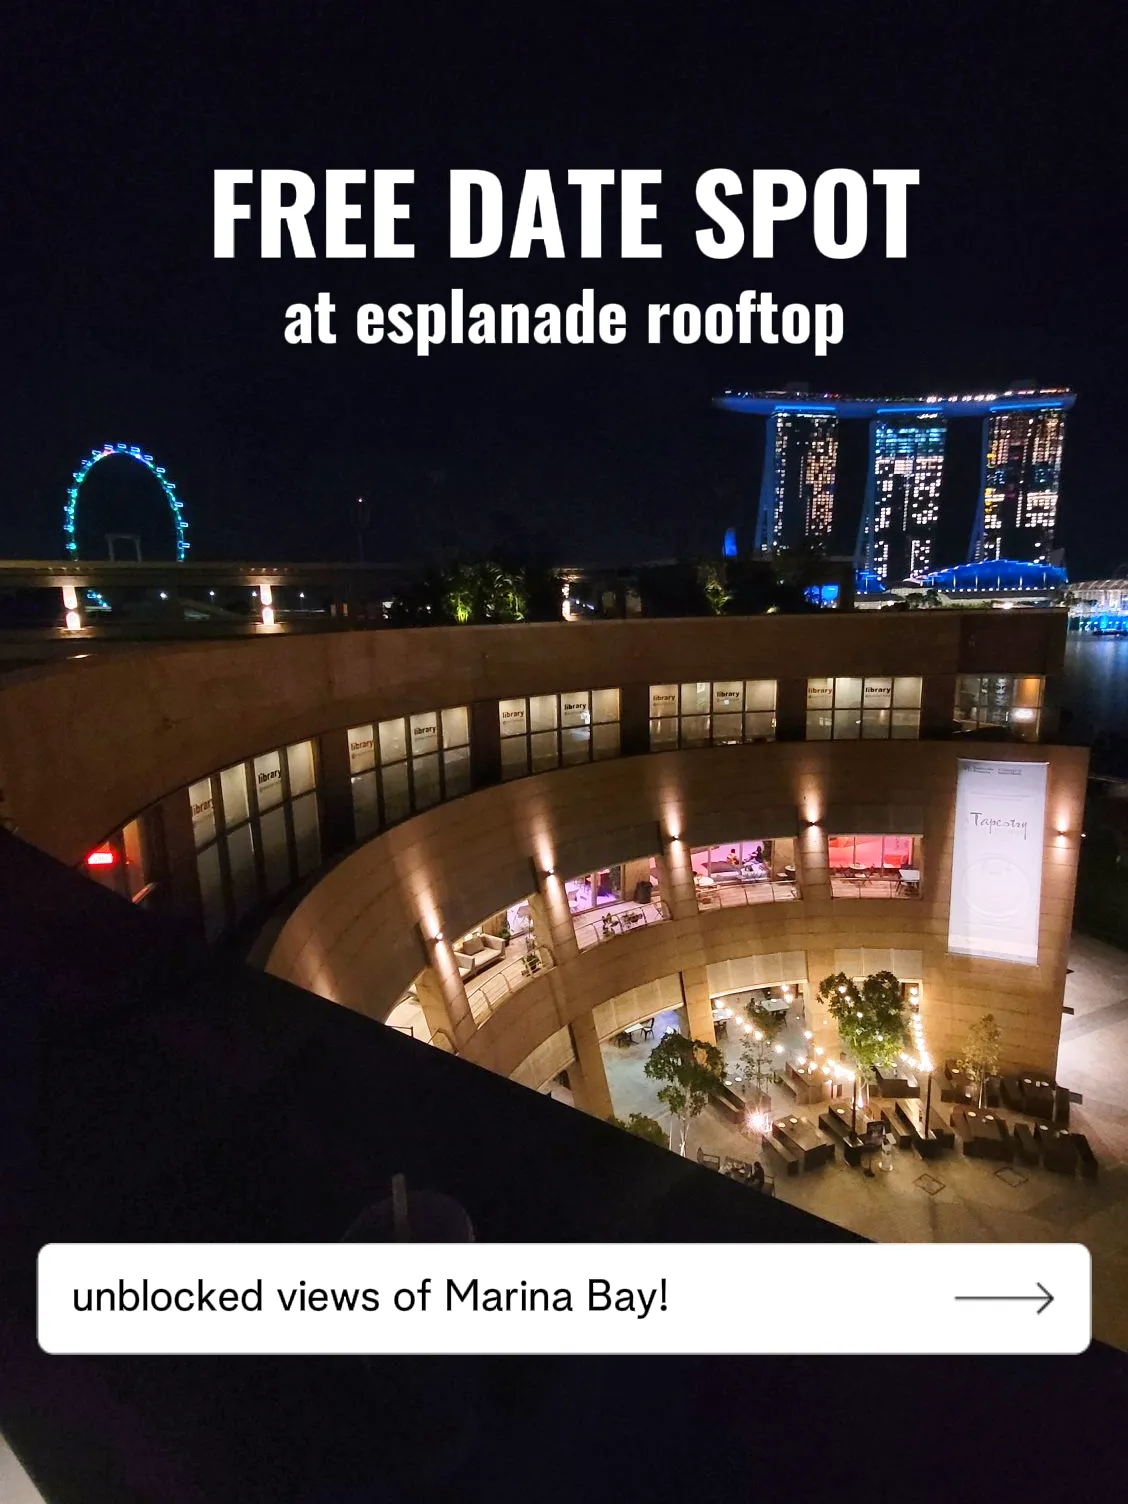 FREE DATE SPOT w views of Marina Bay?!'s images